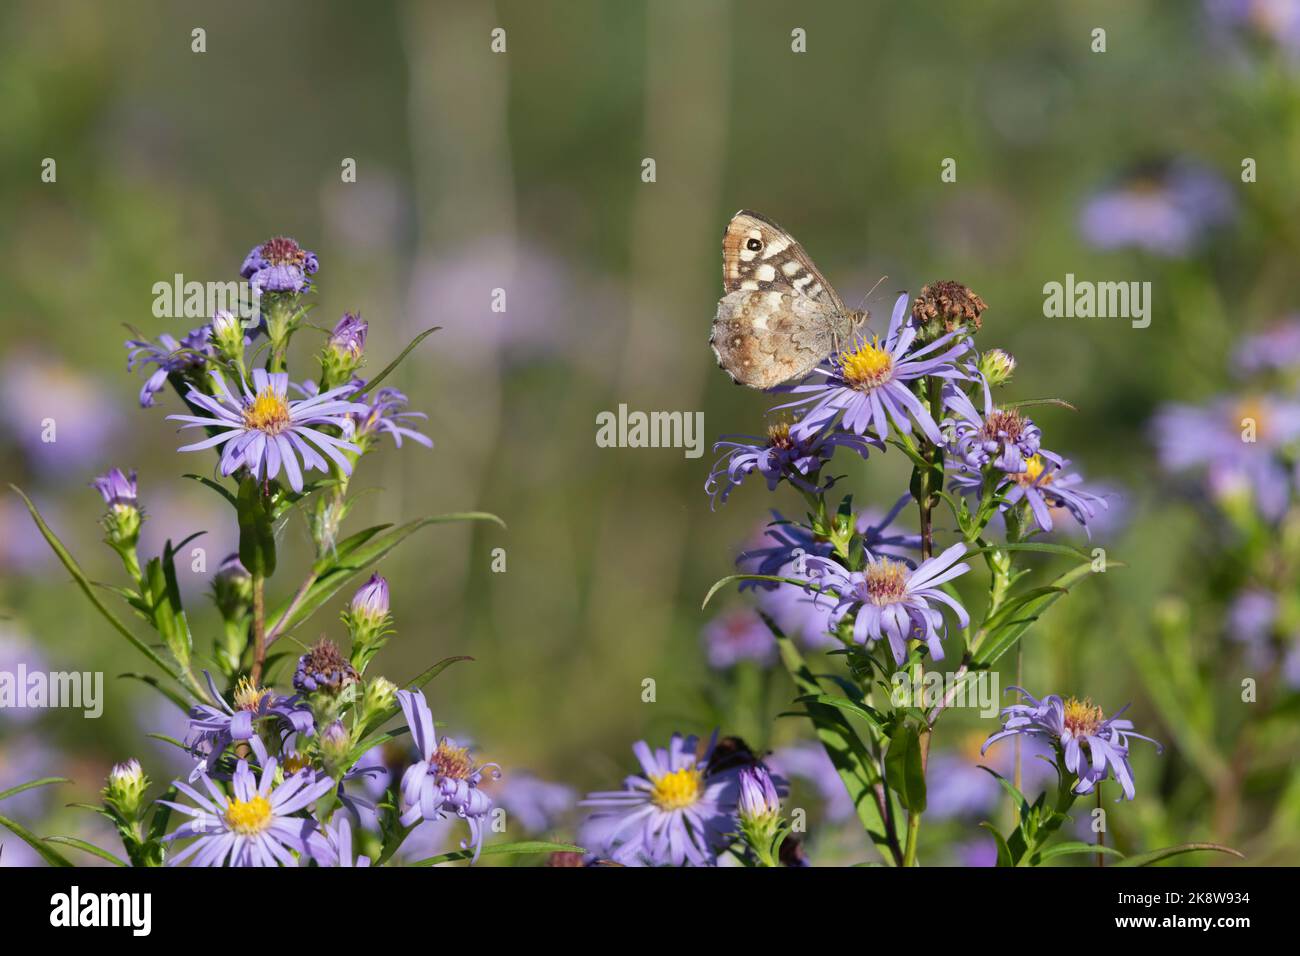 A Speckled Wood Butterfly (Pararge Aegeria) Reveals the Underside of Its Wings as It Forages on Michaelmas Daisy Flowers (Symphyotrichum Novi-Belgii) Stock Photo